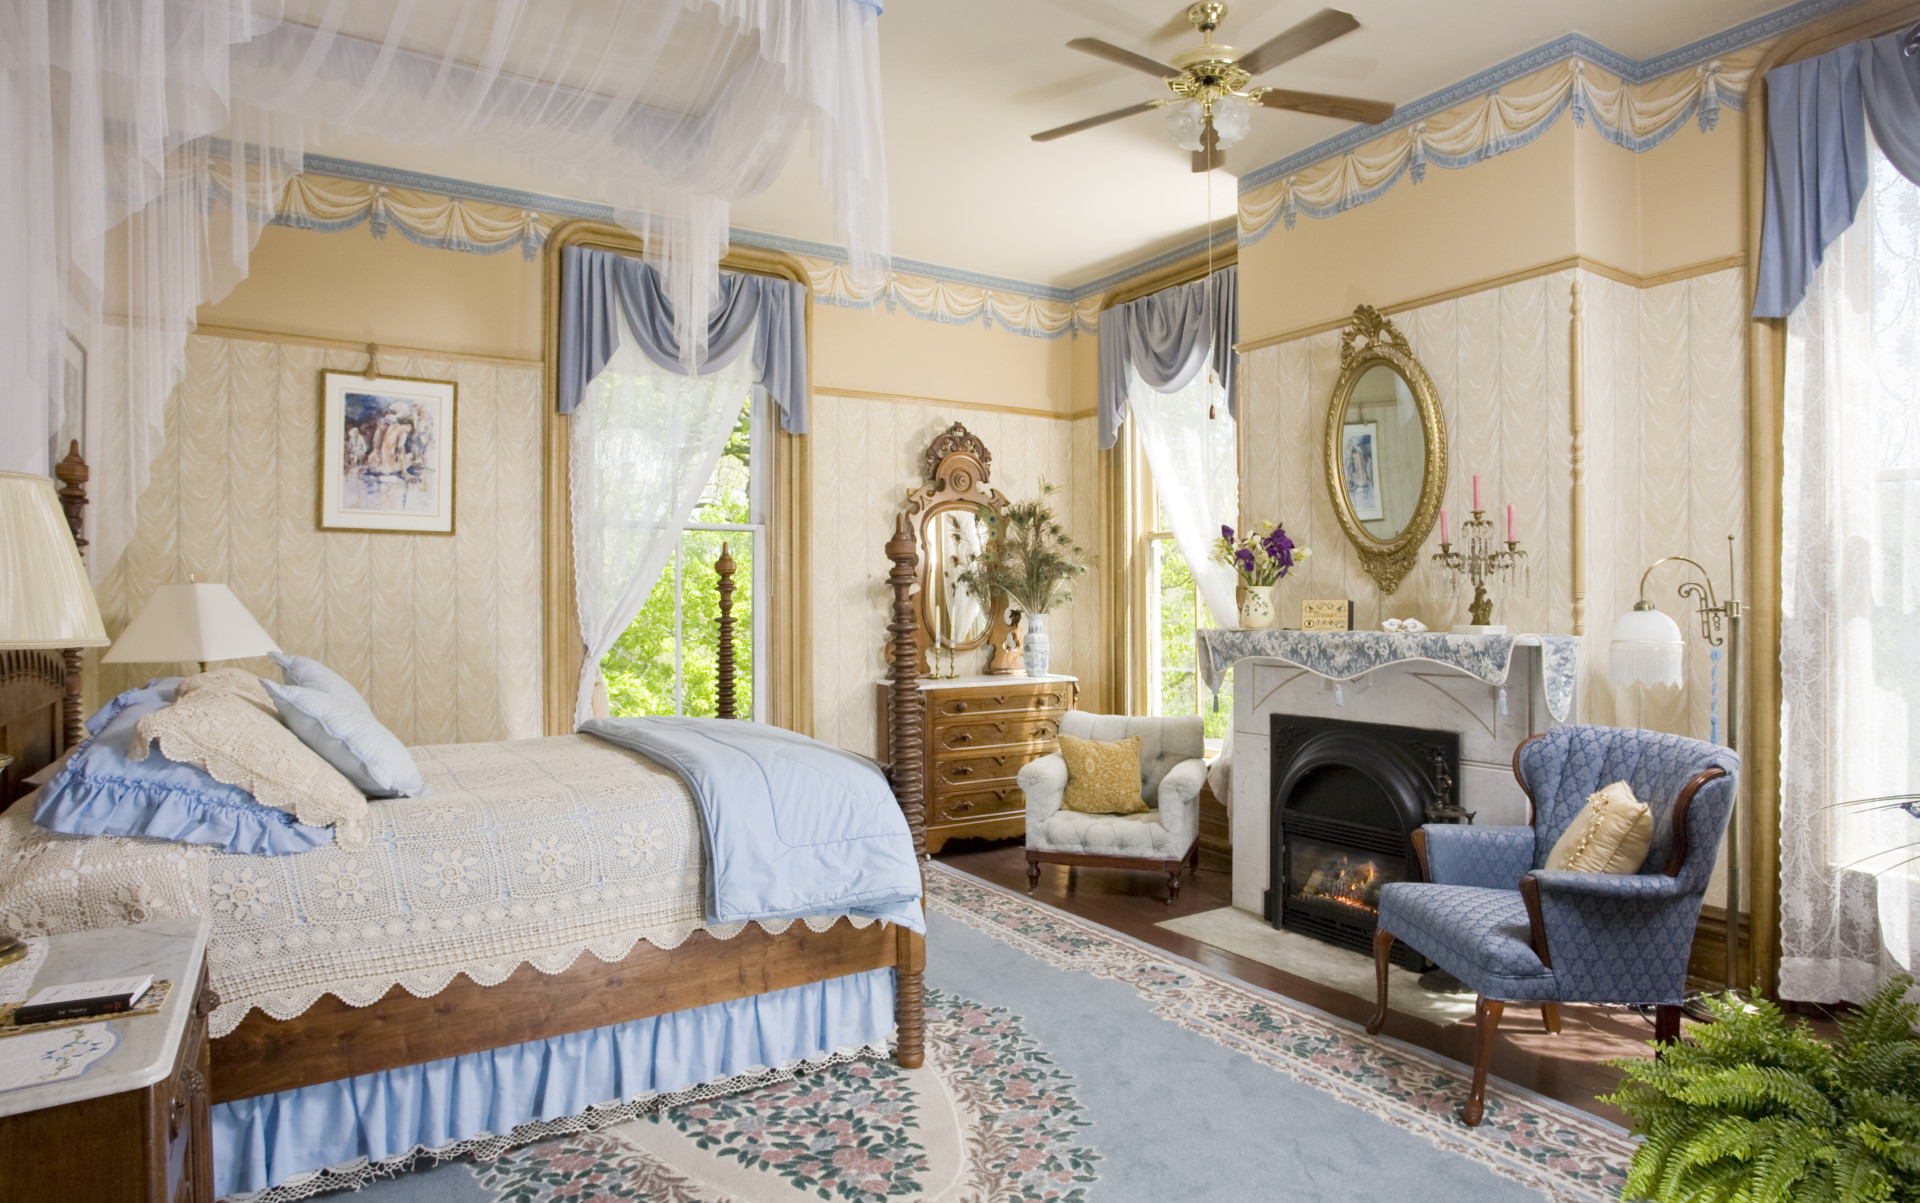 bedroom with canopy bed and chairs decorated in blue a bright light coming in from windows